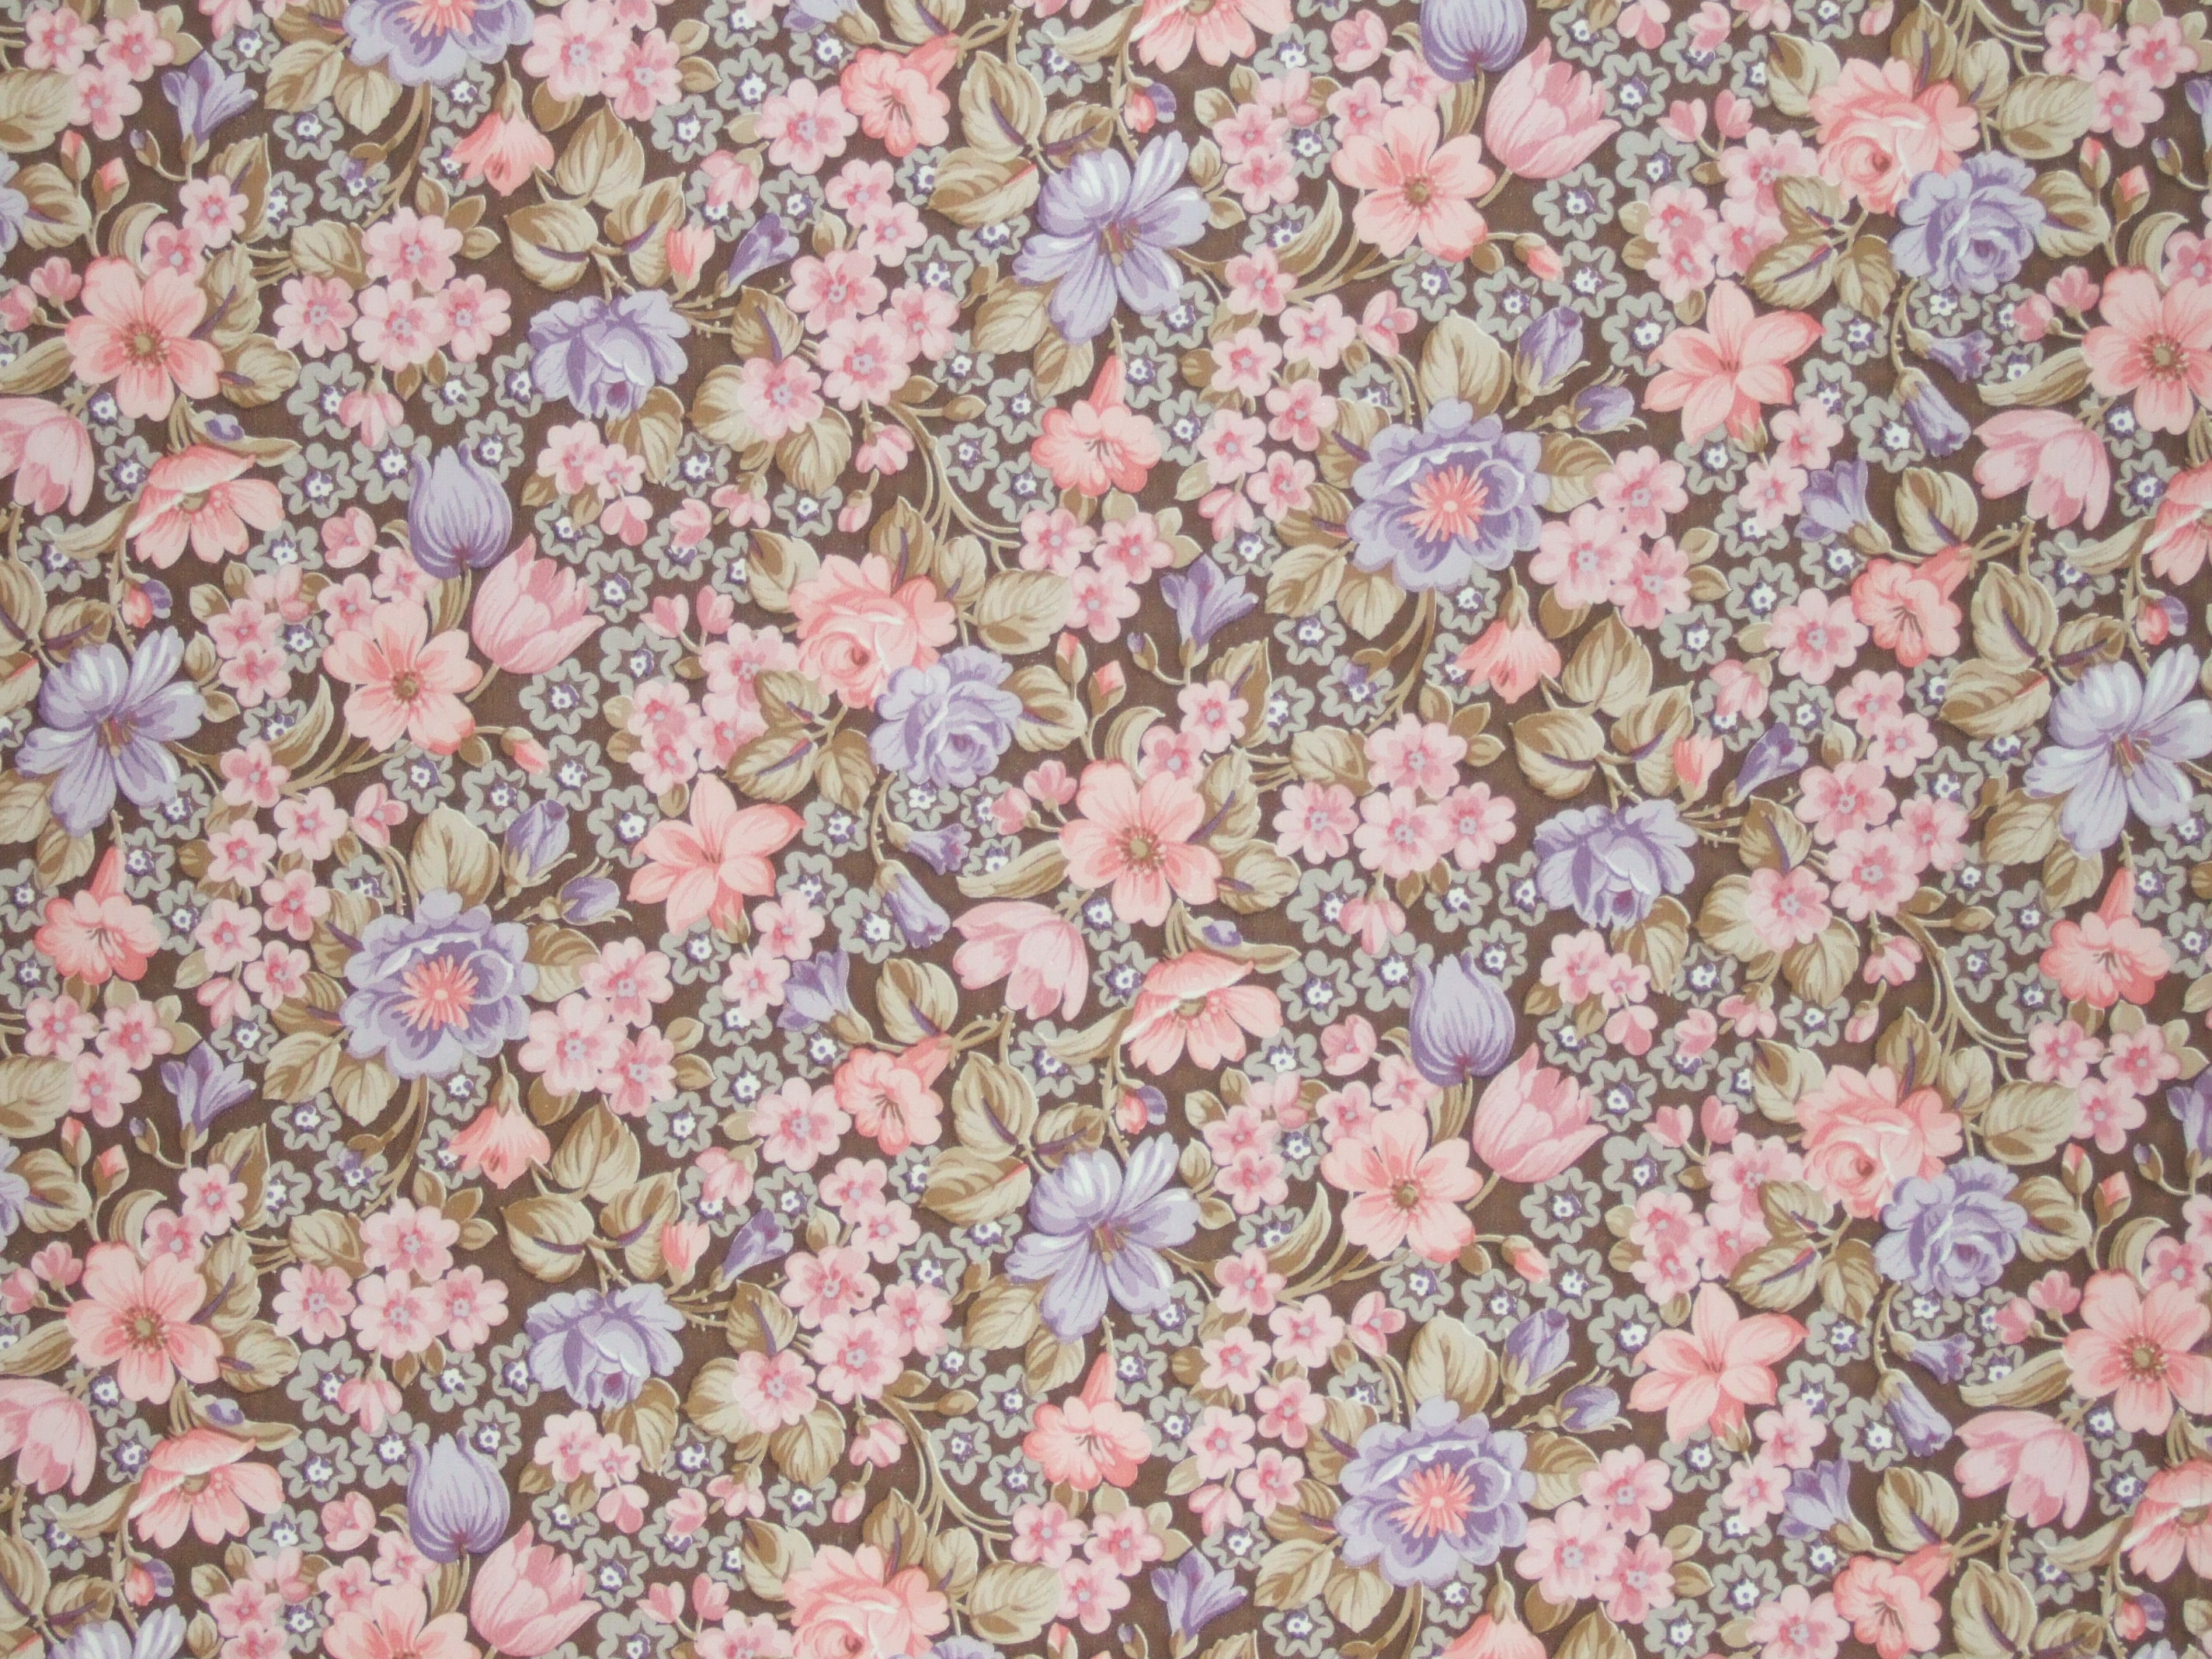 Image*After, photo, tabus wallpaper flowers texture pattern seamless